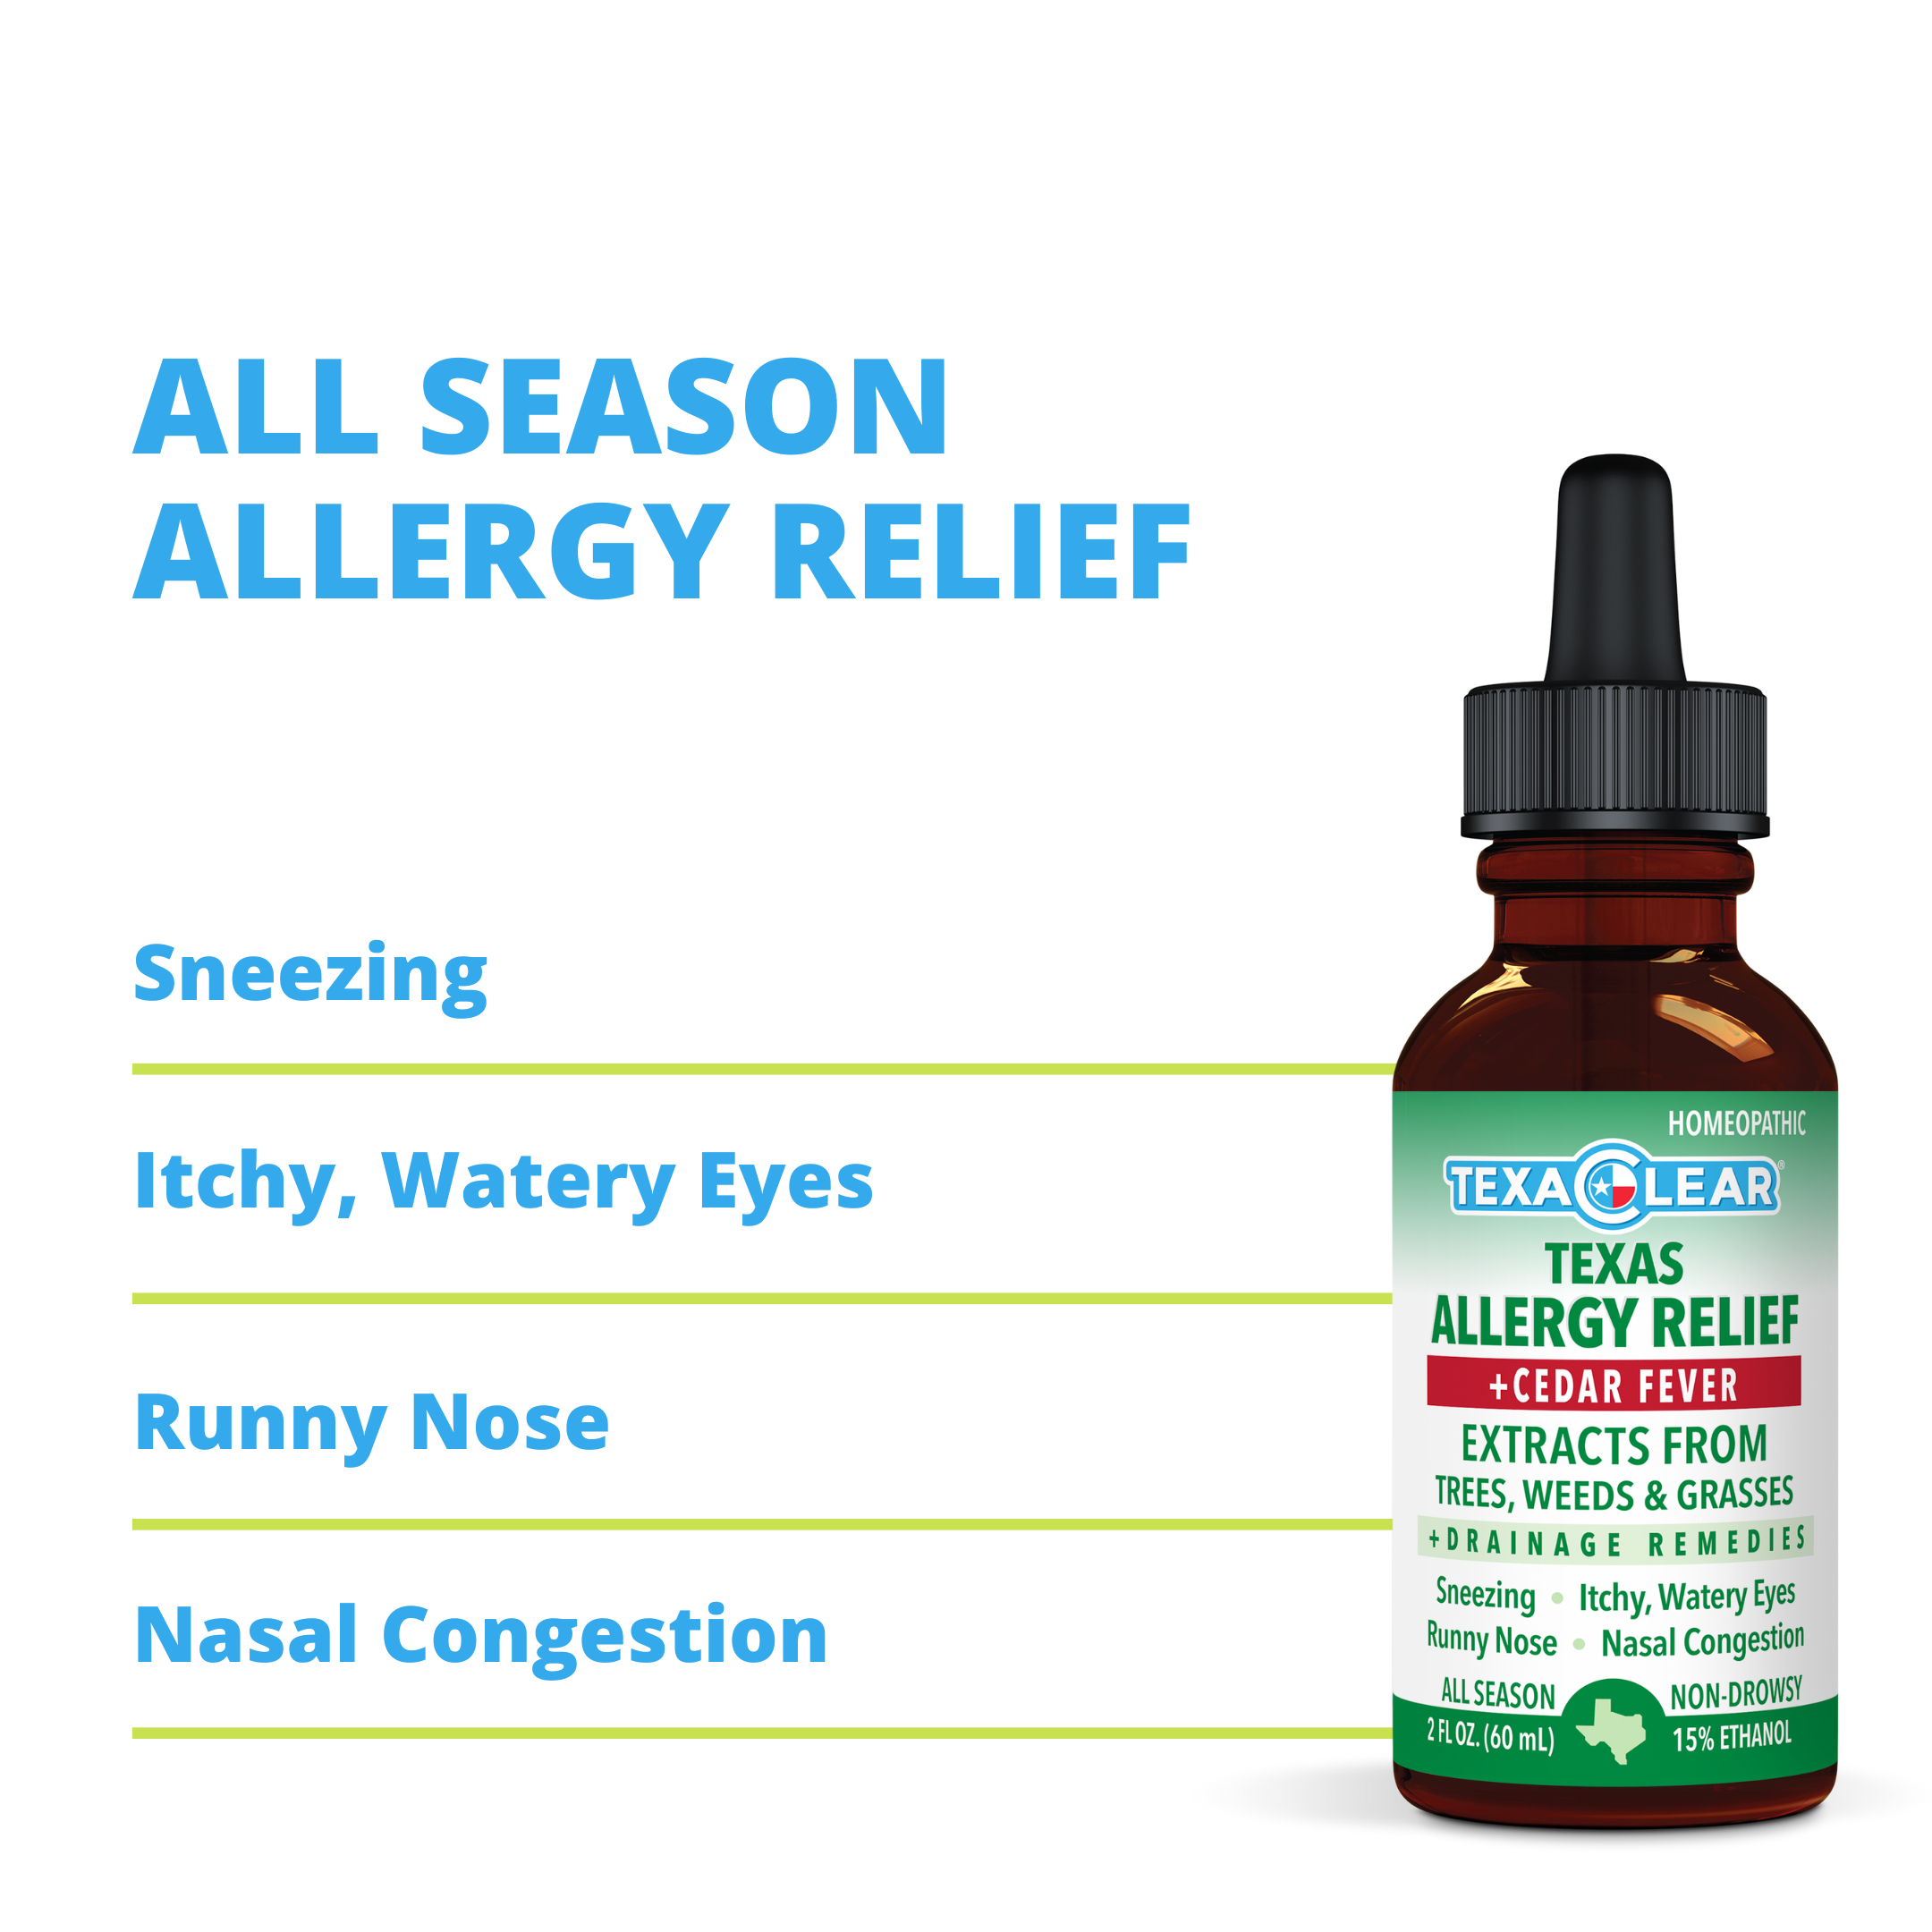 All season homeopathic allergy relief from sneezing, runny nose, itchy watery eyes, nasal congestion